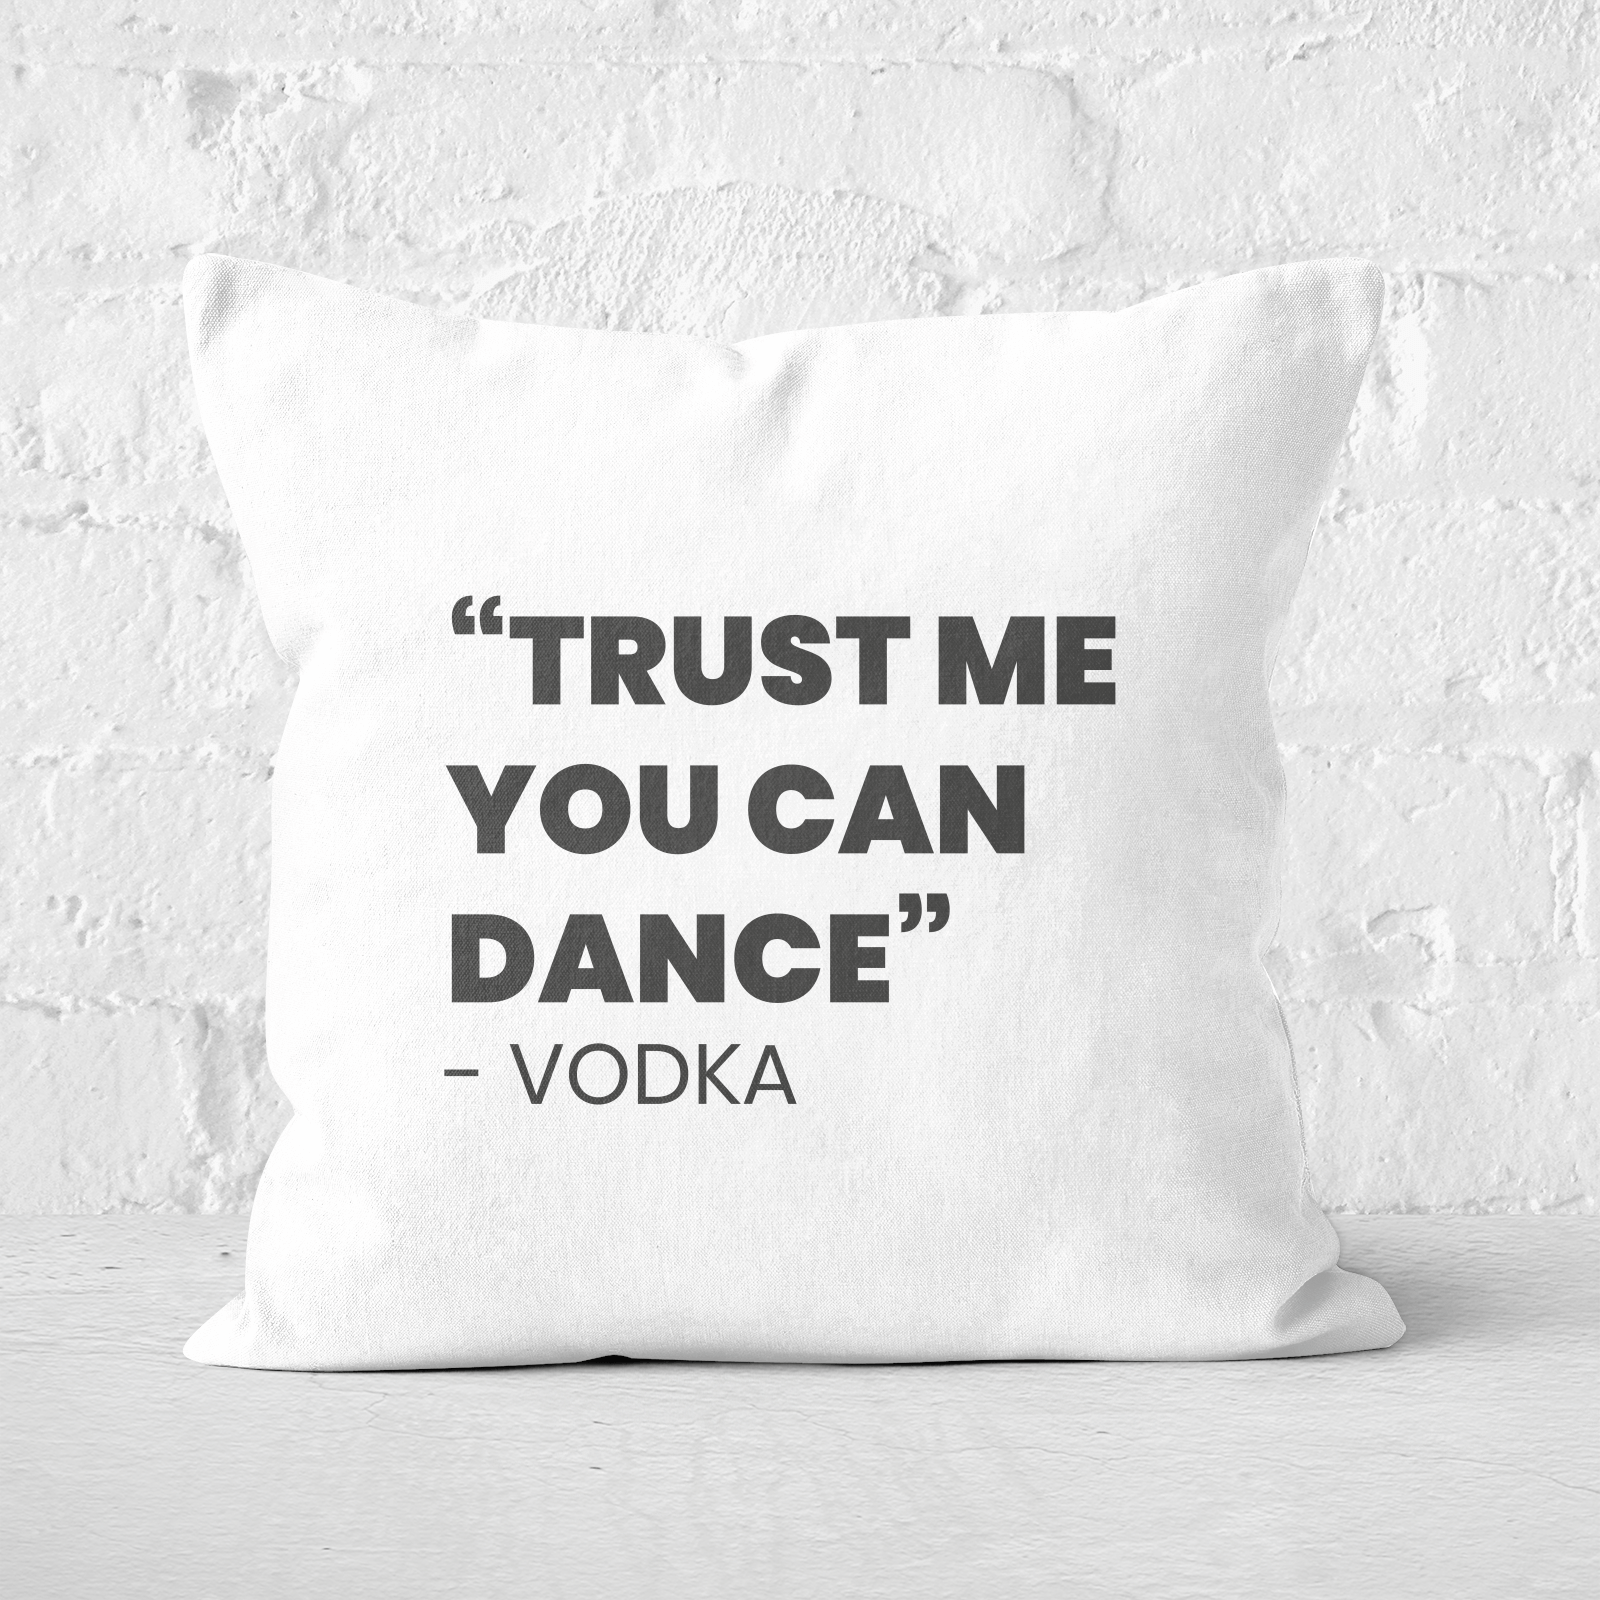 Trust Me You Can Dance - Vodka Square Cushion - 60x60cm - Soft Touch